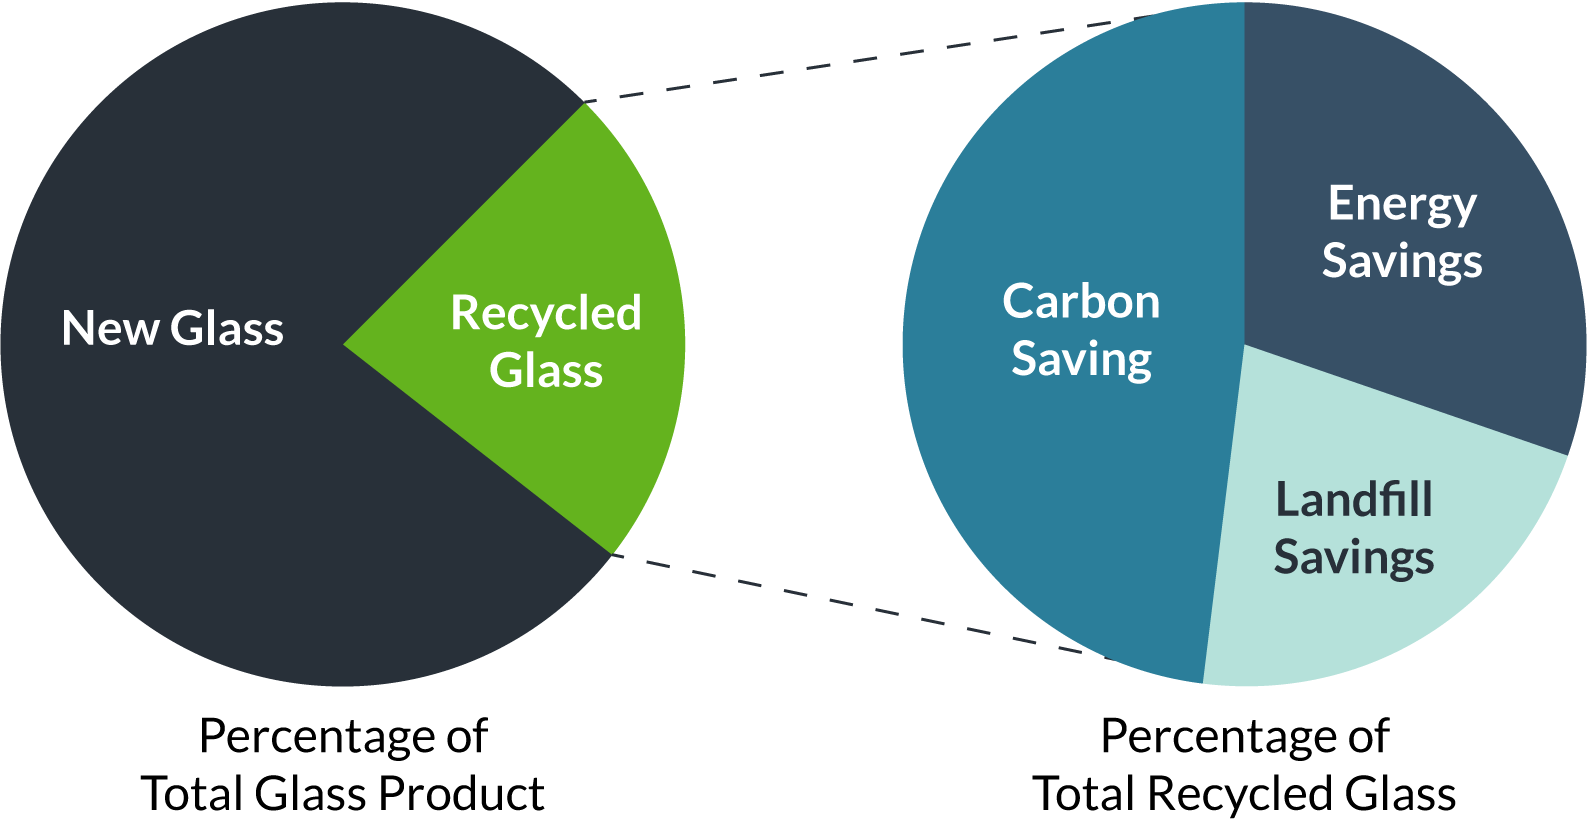 77% of all glass produced is new glass while 23% is recycled. Within the total recycled glass, the impact is on 5% landfill savings, 7% energy savings, and 11% carbon savings